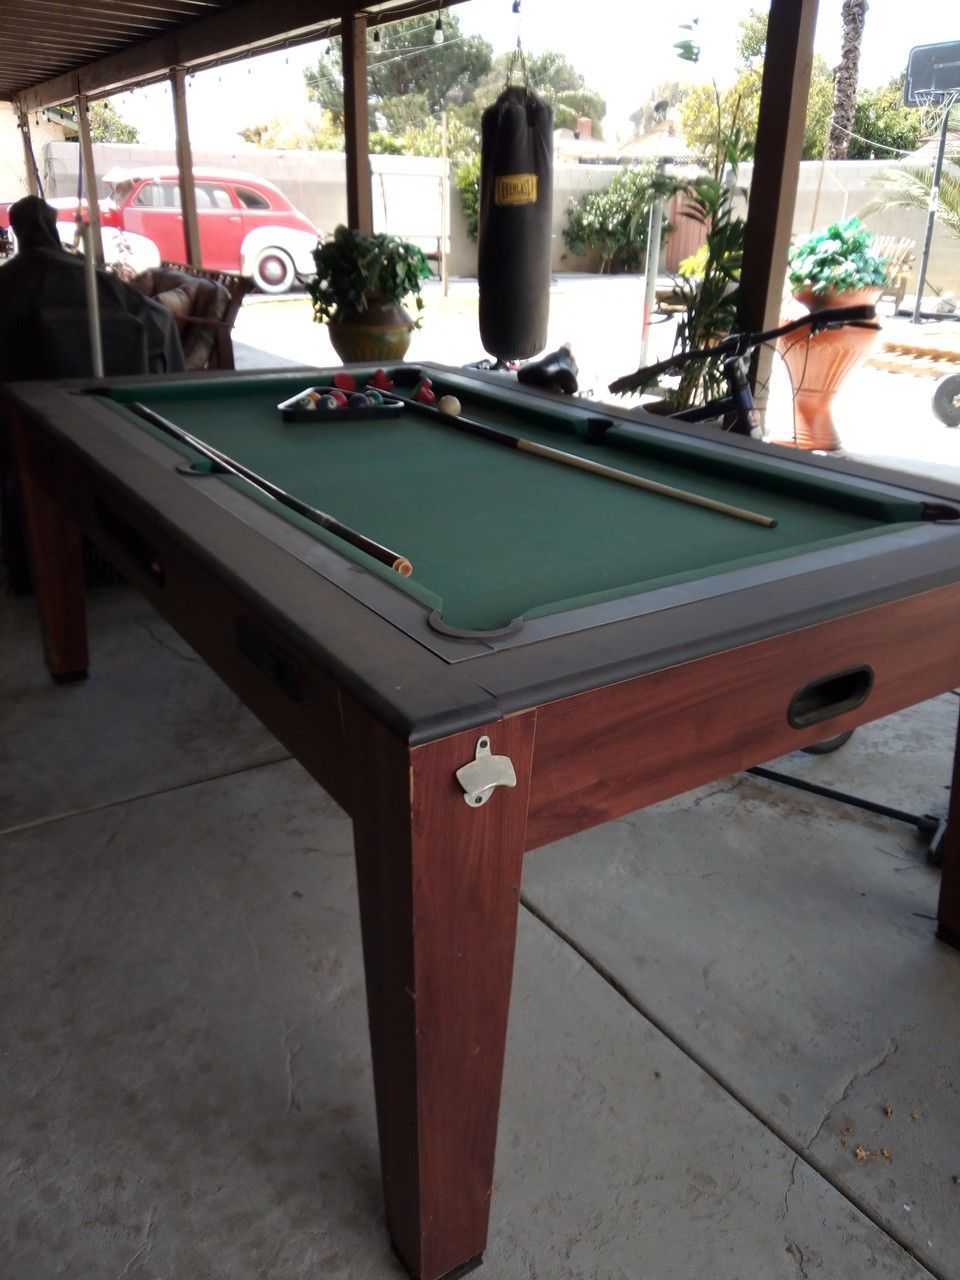 Pool table and air hockey table.